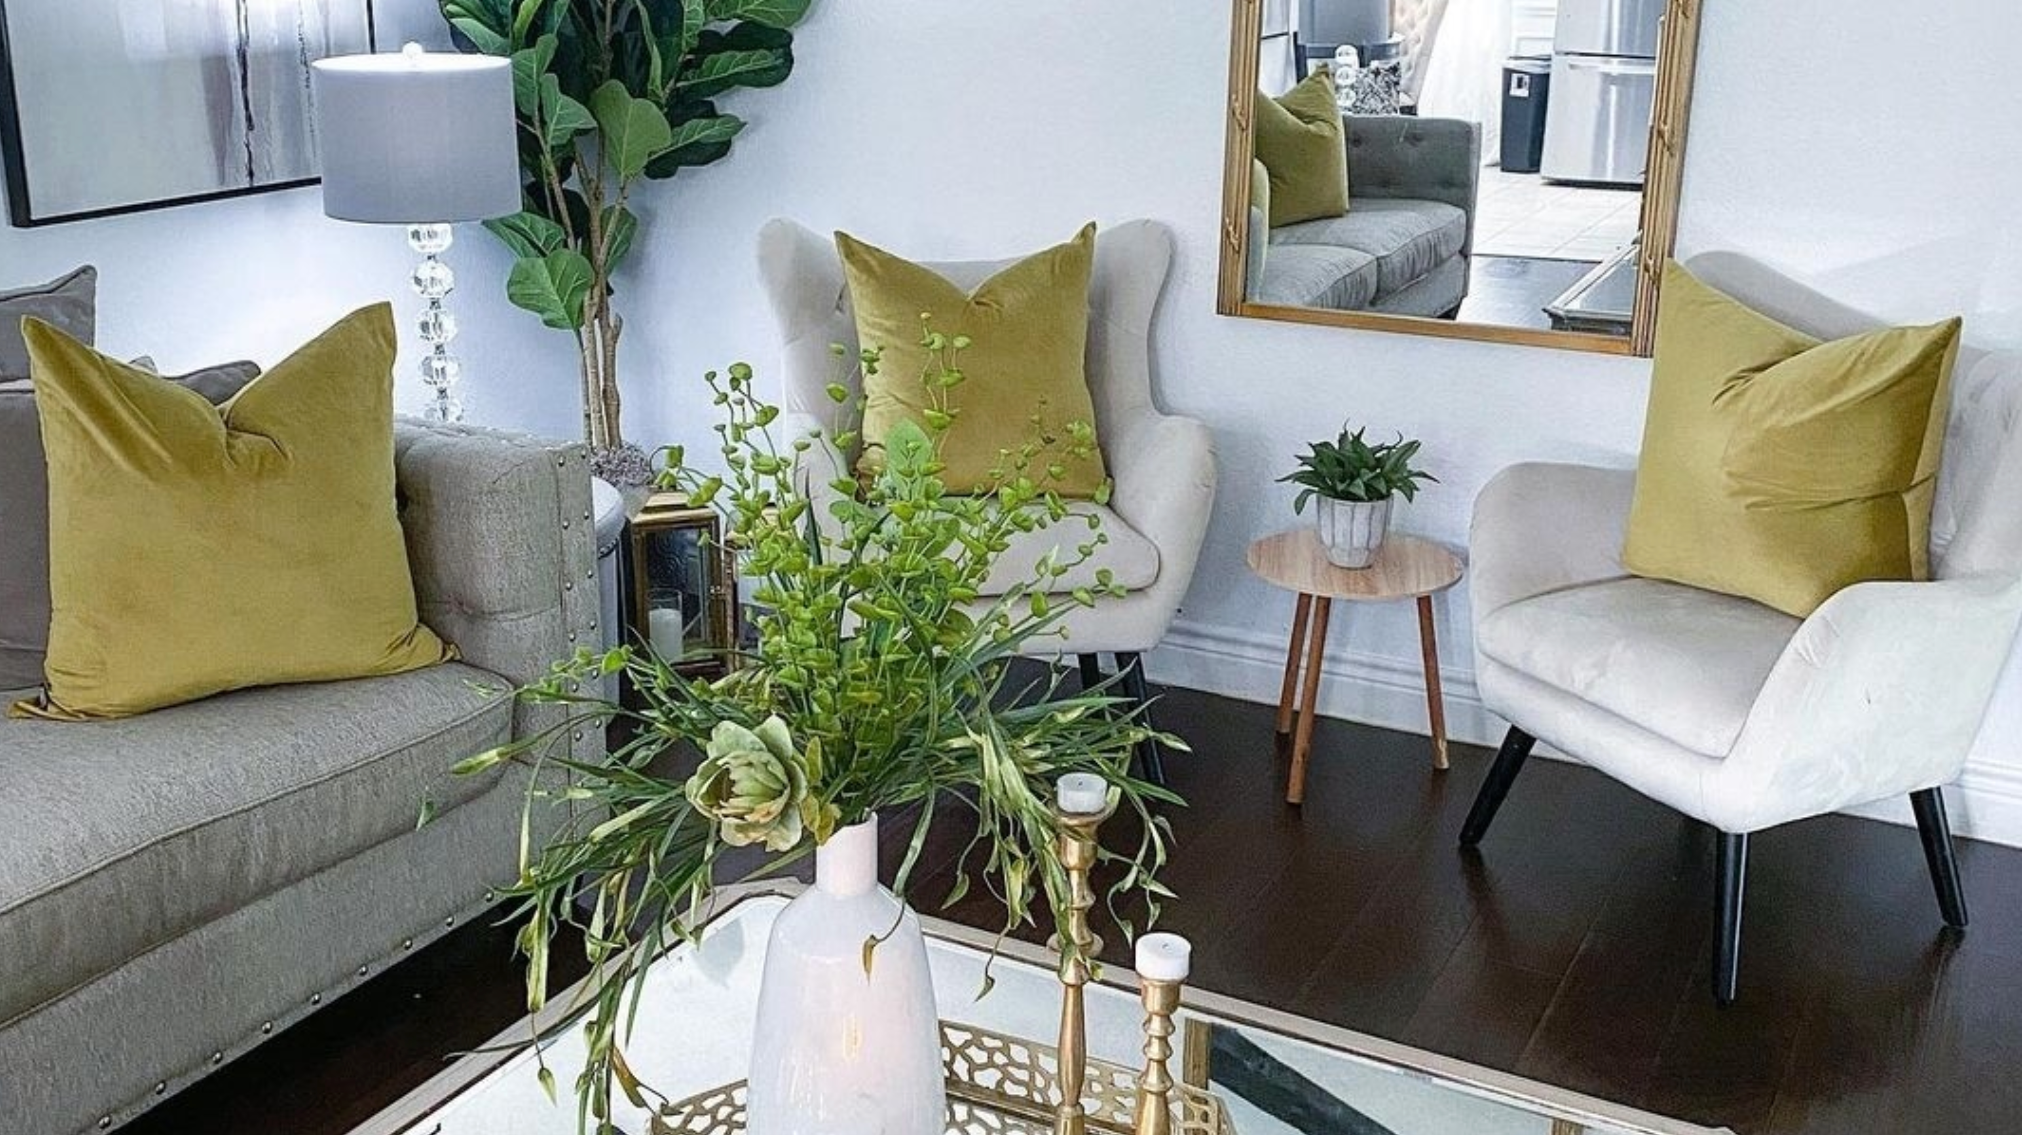 Home Décor Tips To Add Texture To Every Room With Fake Plants And Greenery